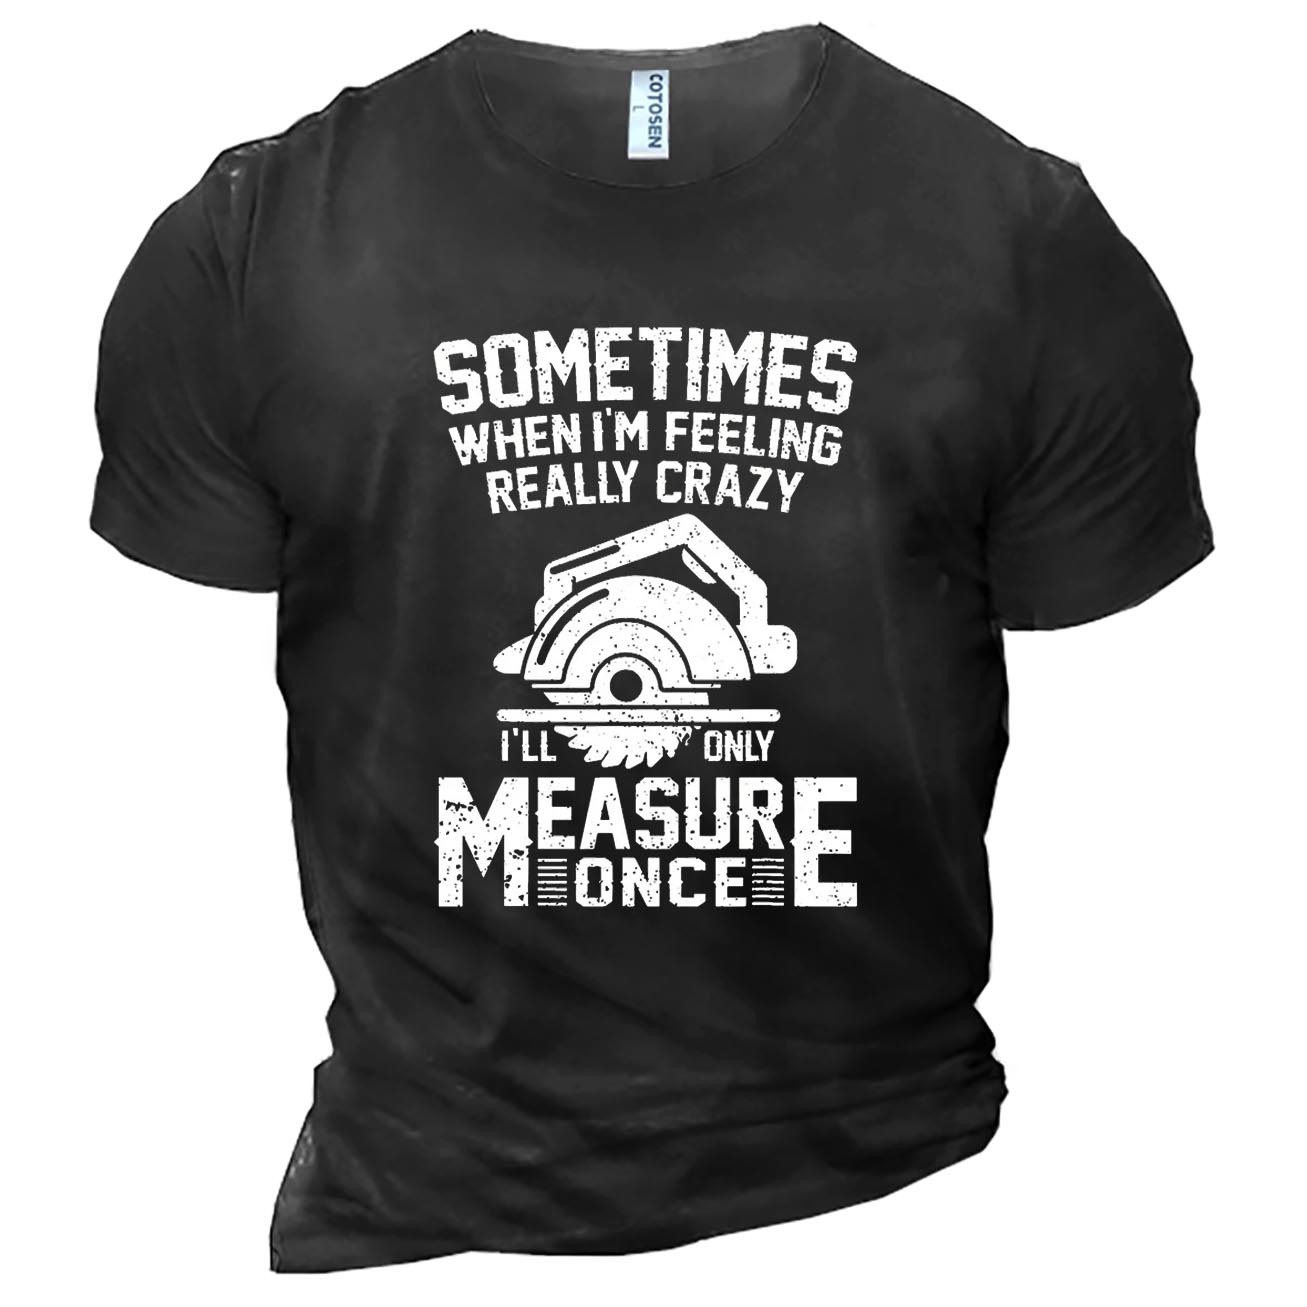 Men's Sometimes When I'm Chic Feeling Really Crazy I'll Only Measure Once Cotton T-shirt